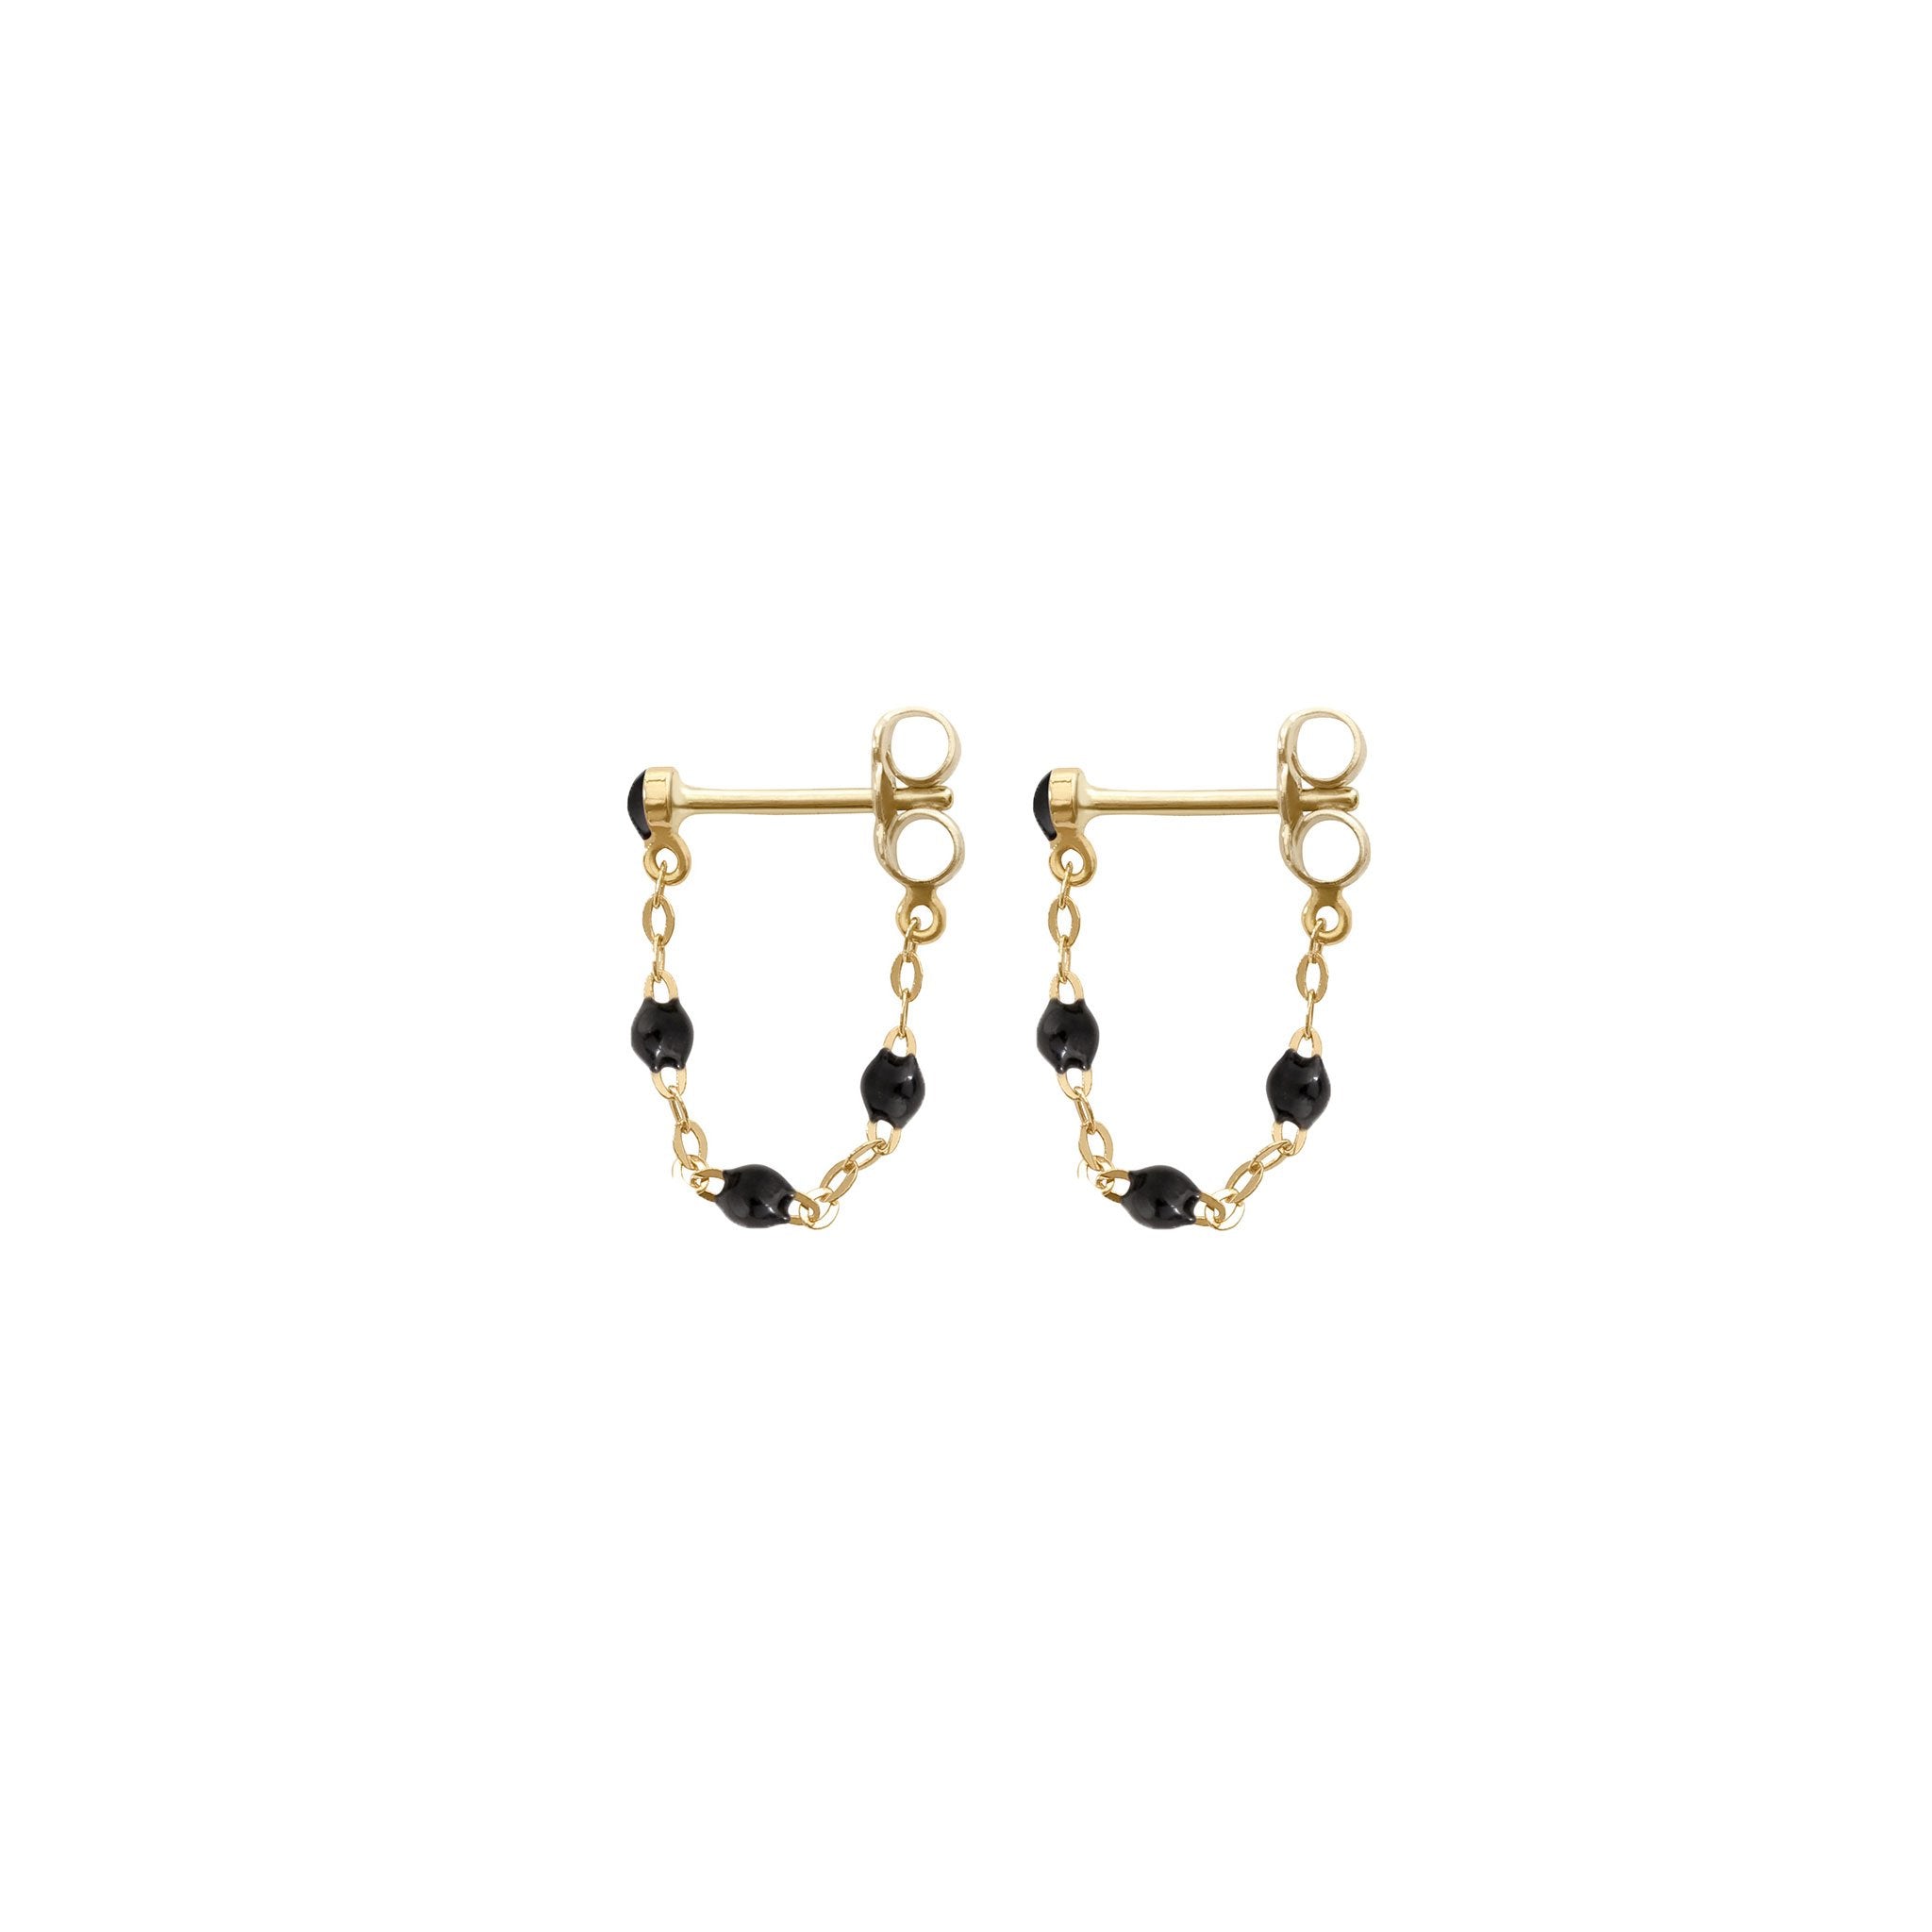 Share 63+ black and yellow earrings latest